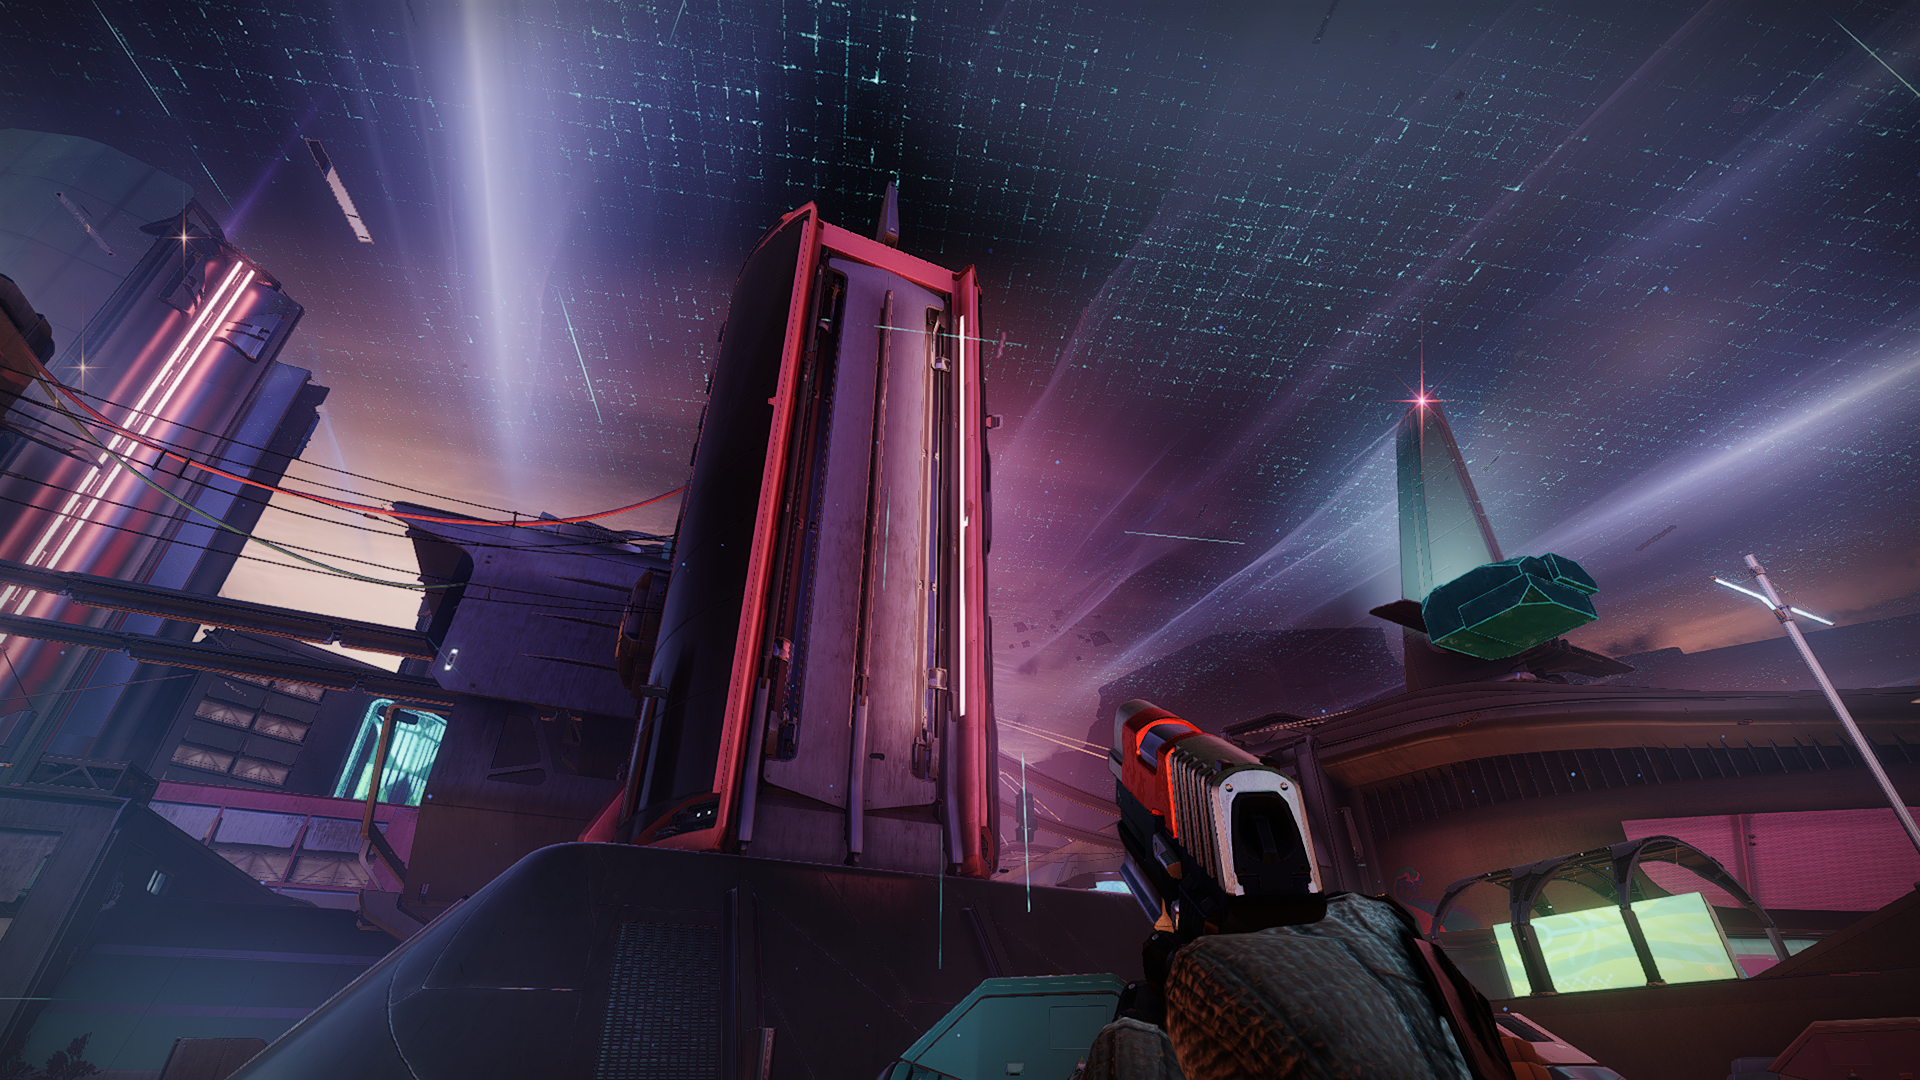 Destiny 2 Lightfall - another Neomuna skybox that features neon pink skyscrapers at night